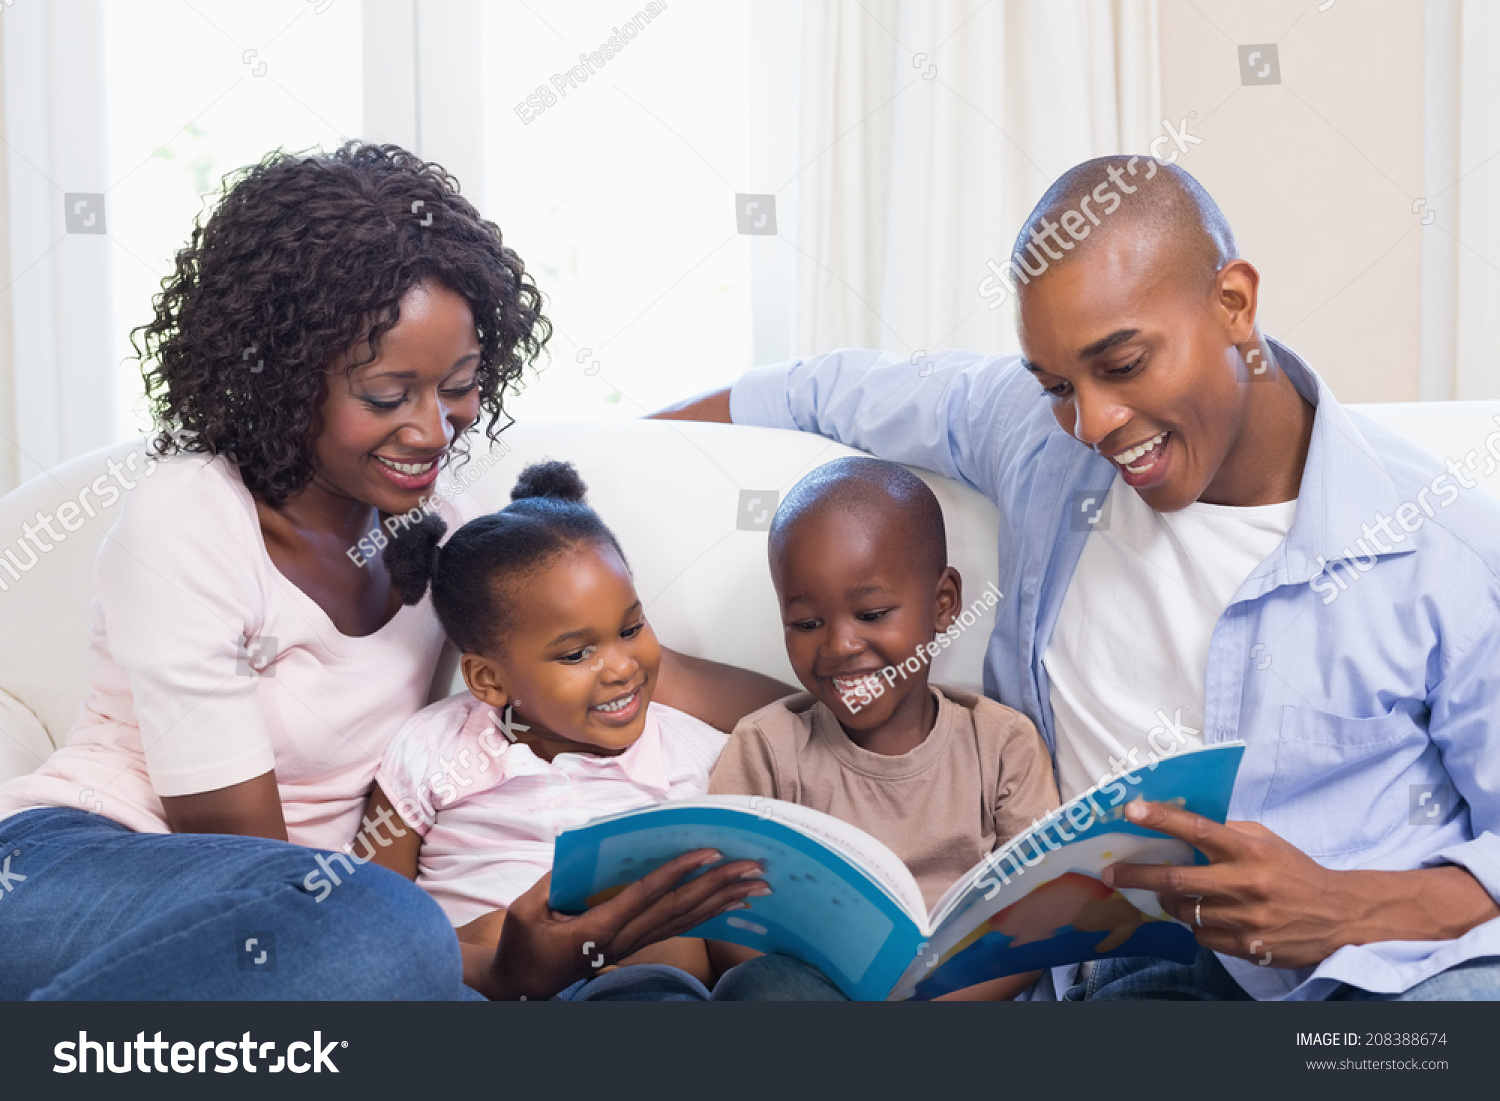 Happy family on the couch reading storybook at home in the living room #208388674